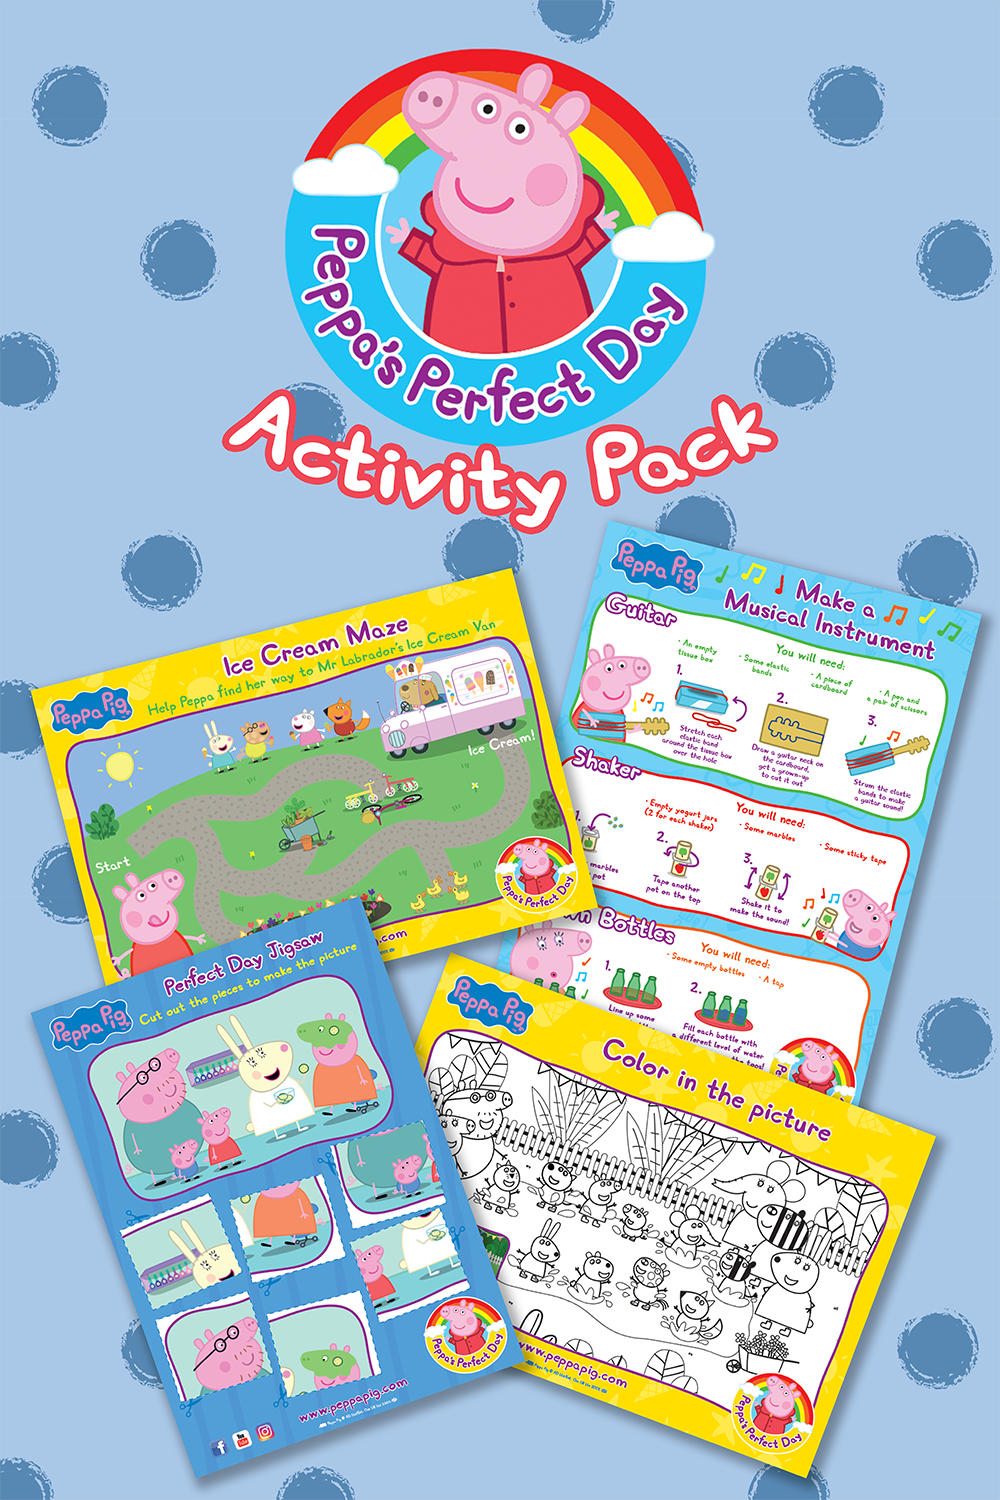 Peppa's Perfect Day Activity Pack